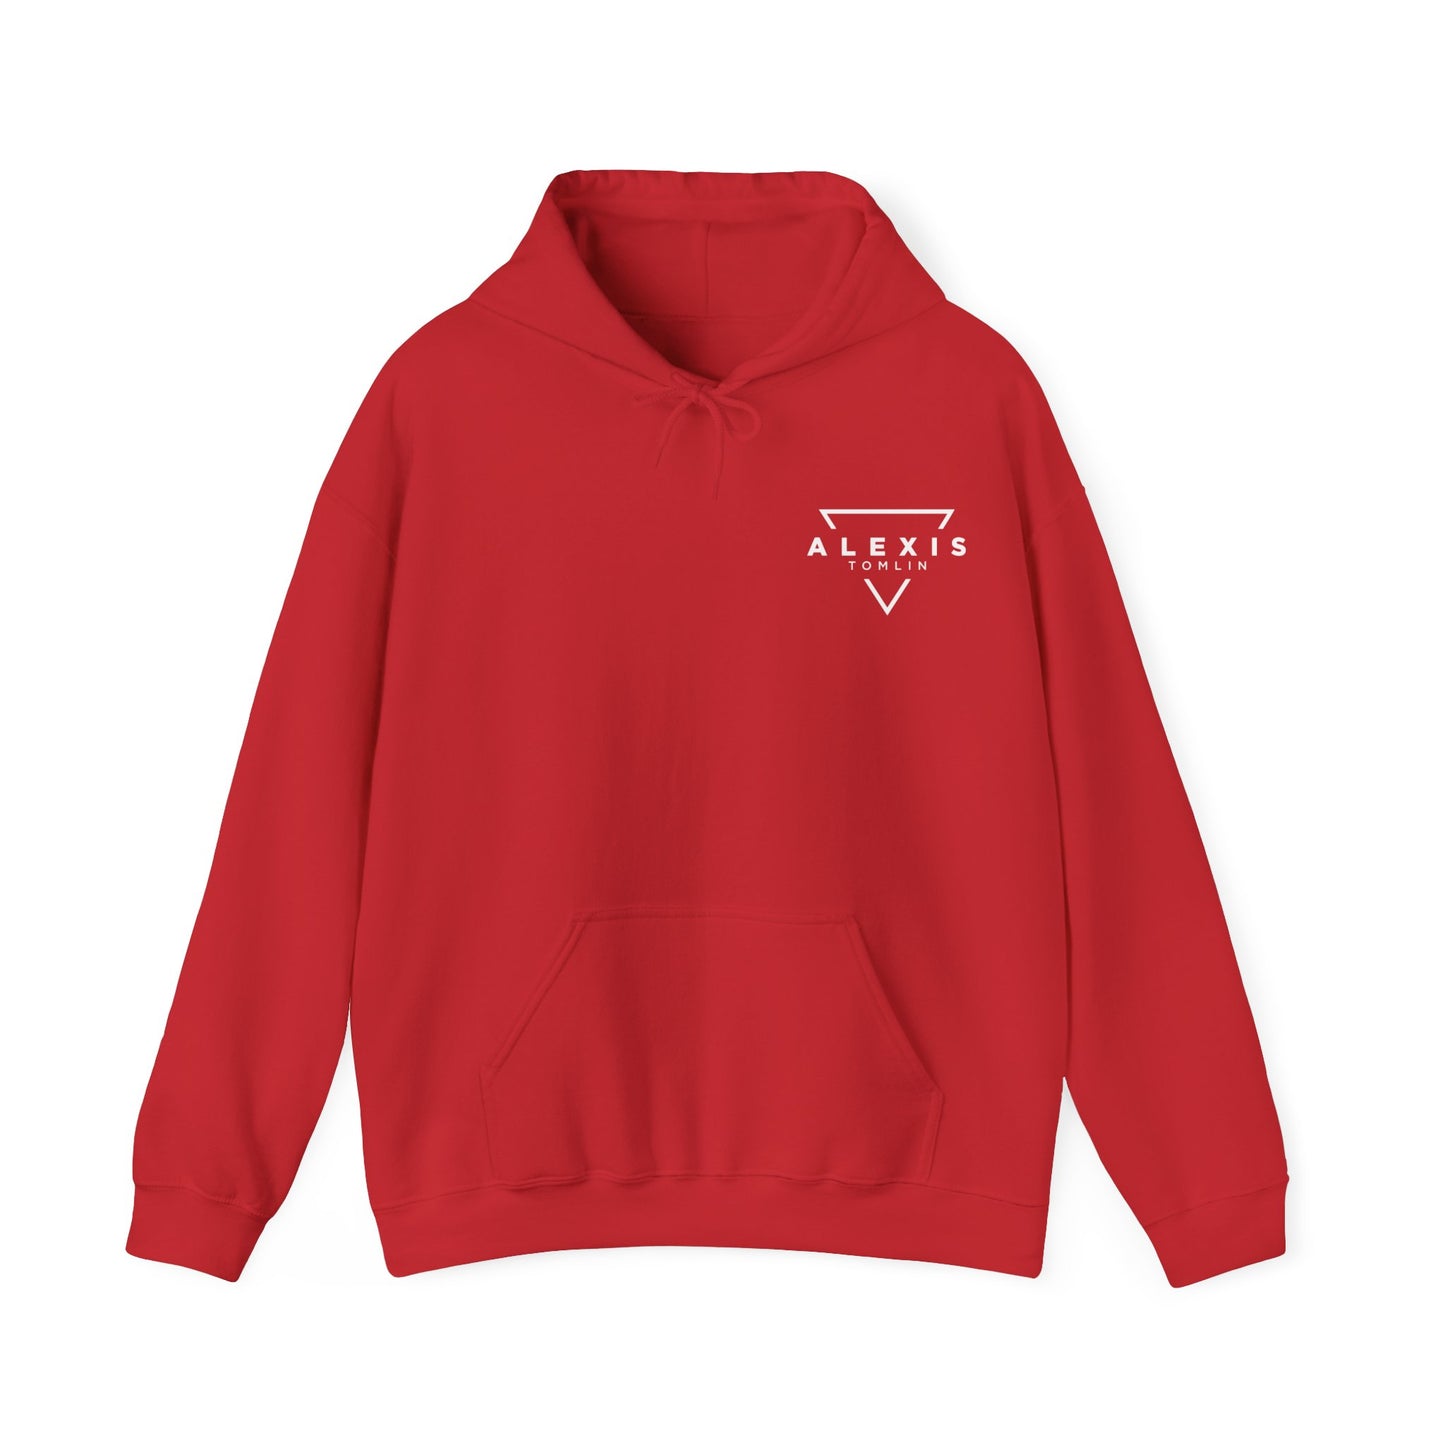 Alexis Tomlin "AT" Double Sided Hoodie